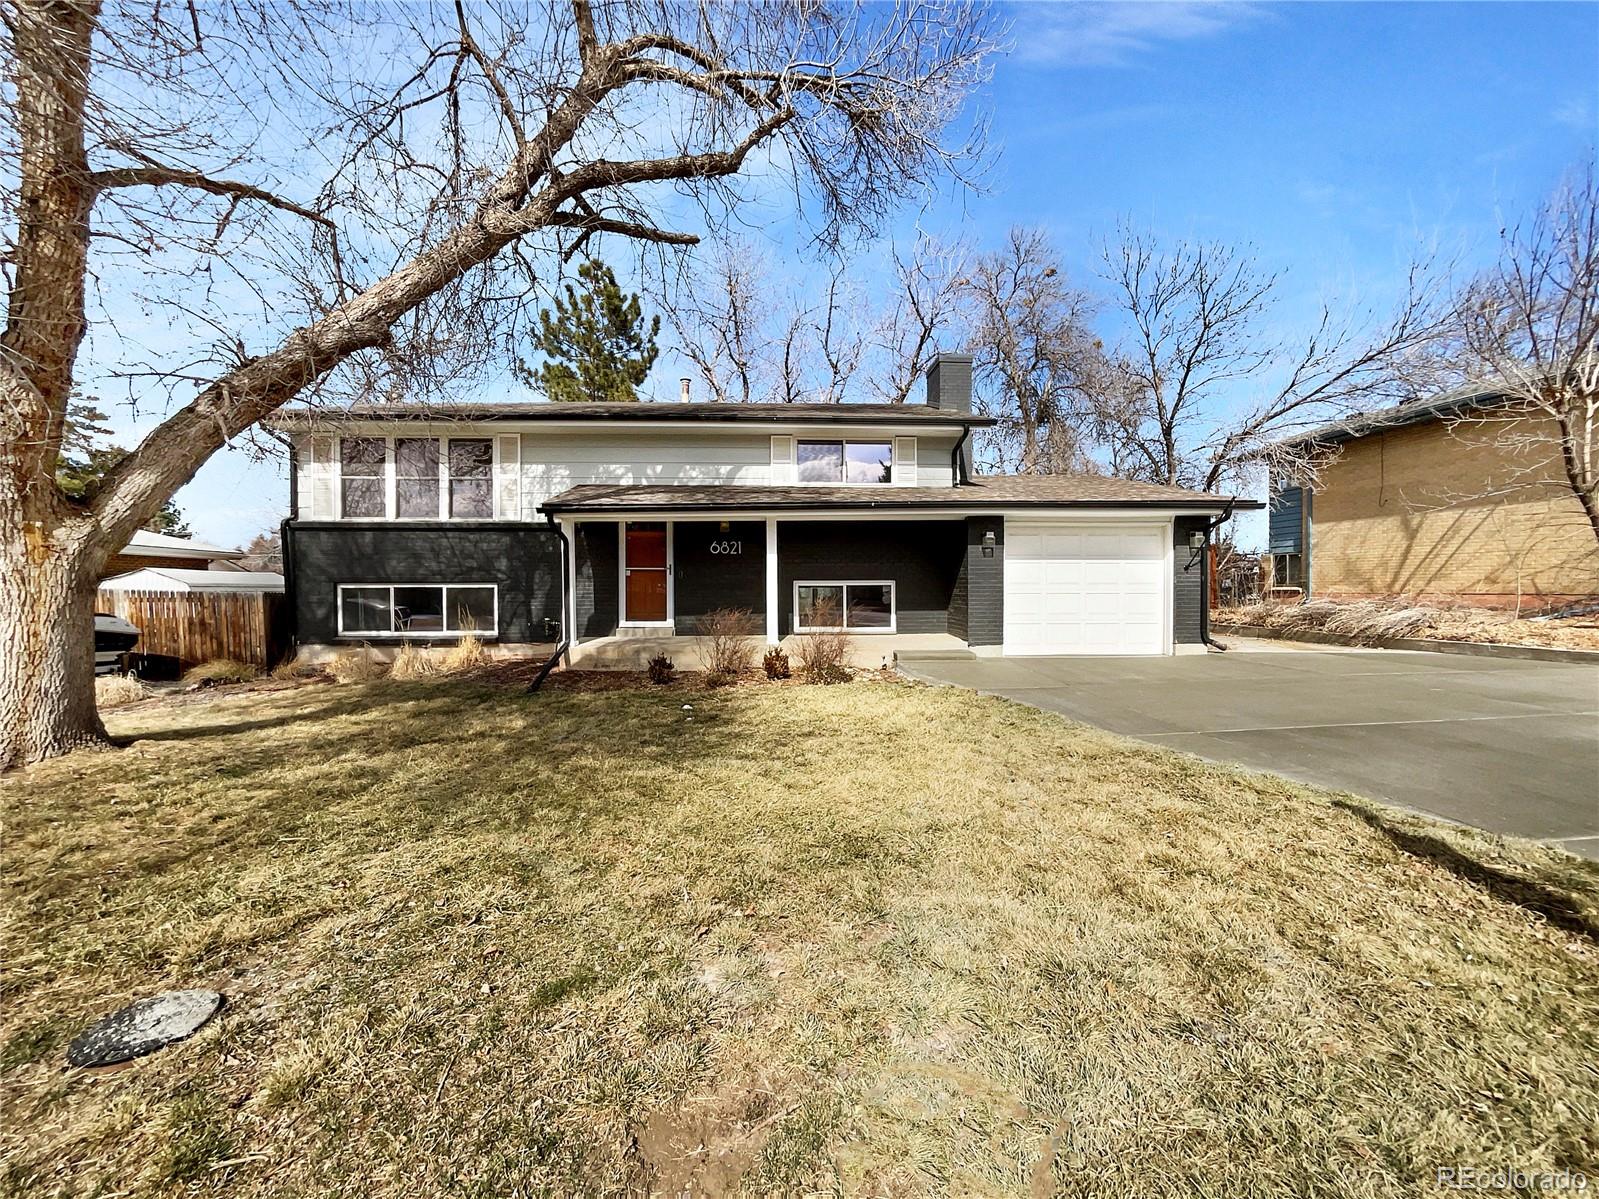 6821 W 75th Place, arvada MLS: 4887328 Beds: 4 Baths: 2 Price: $584,000